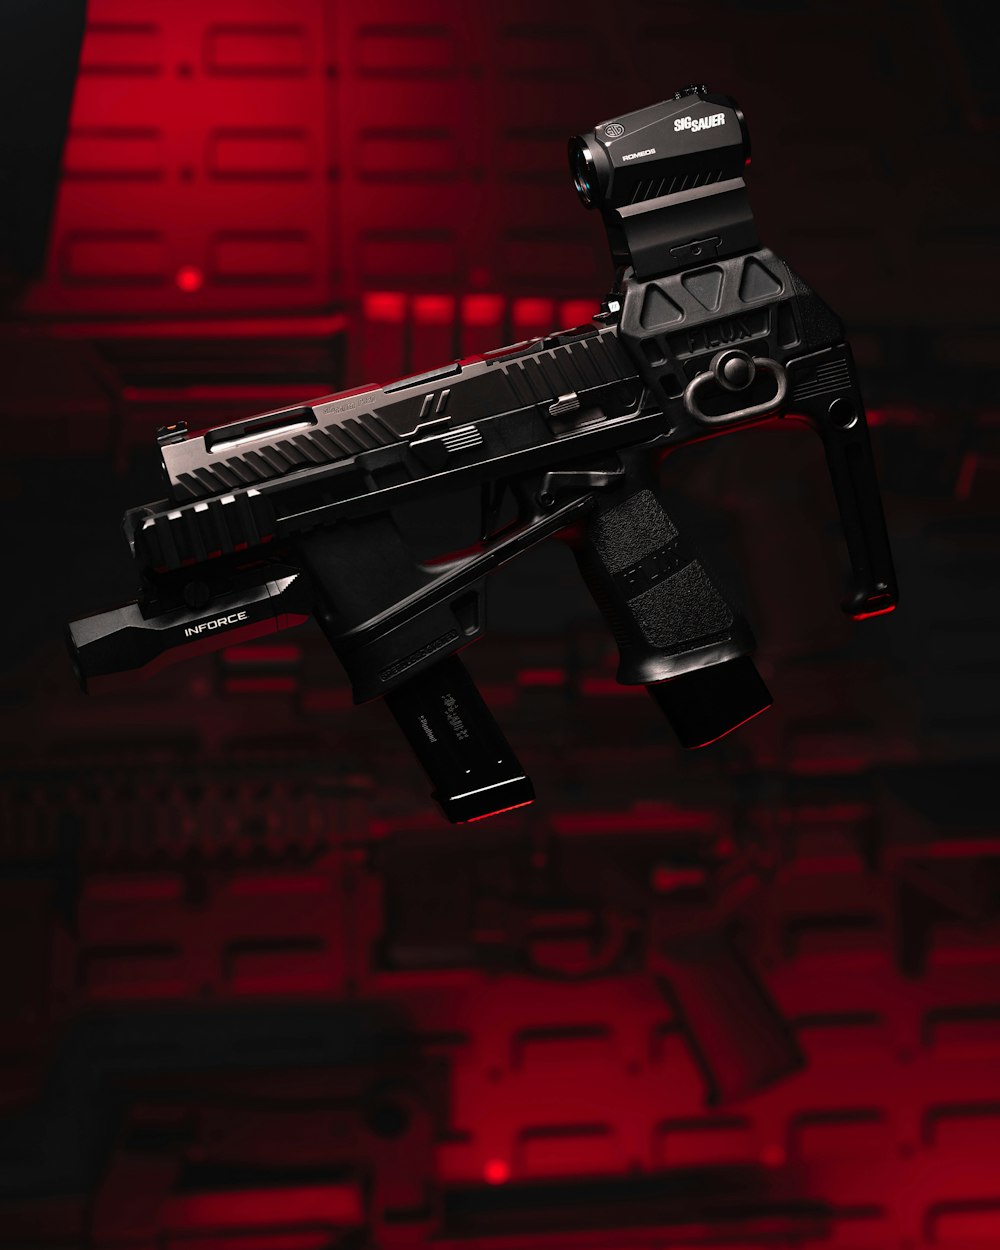 a close up of a gun with a red light in the background